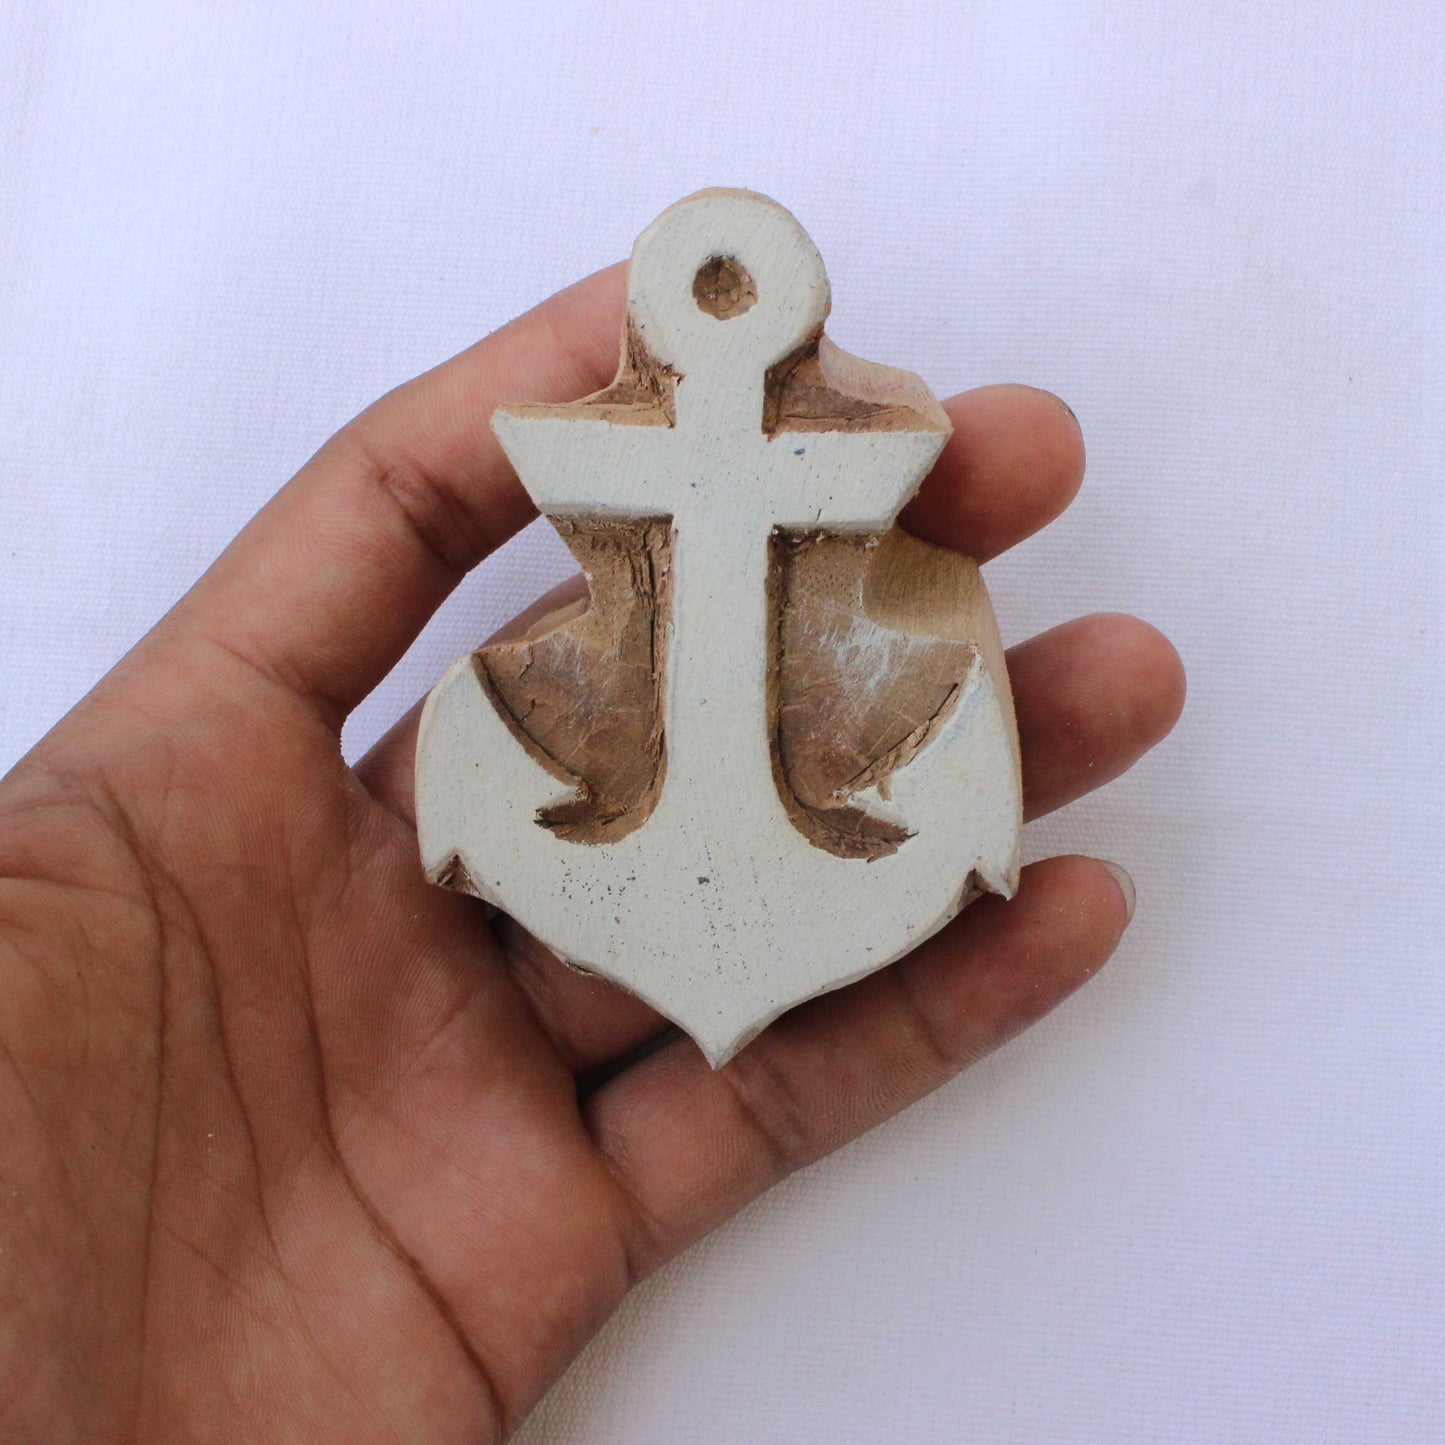 Nautical Block Print Stamp Hand Carved Wood Block Stamp Marine Stamp Hand Carved Textile Printing Block For Printing Journey Soap Stamp